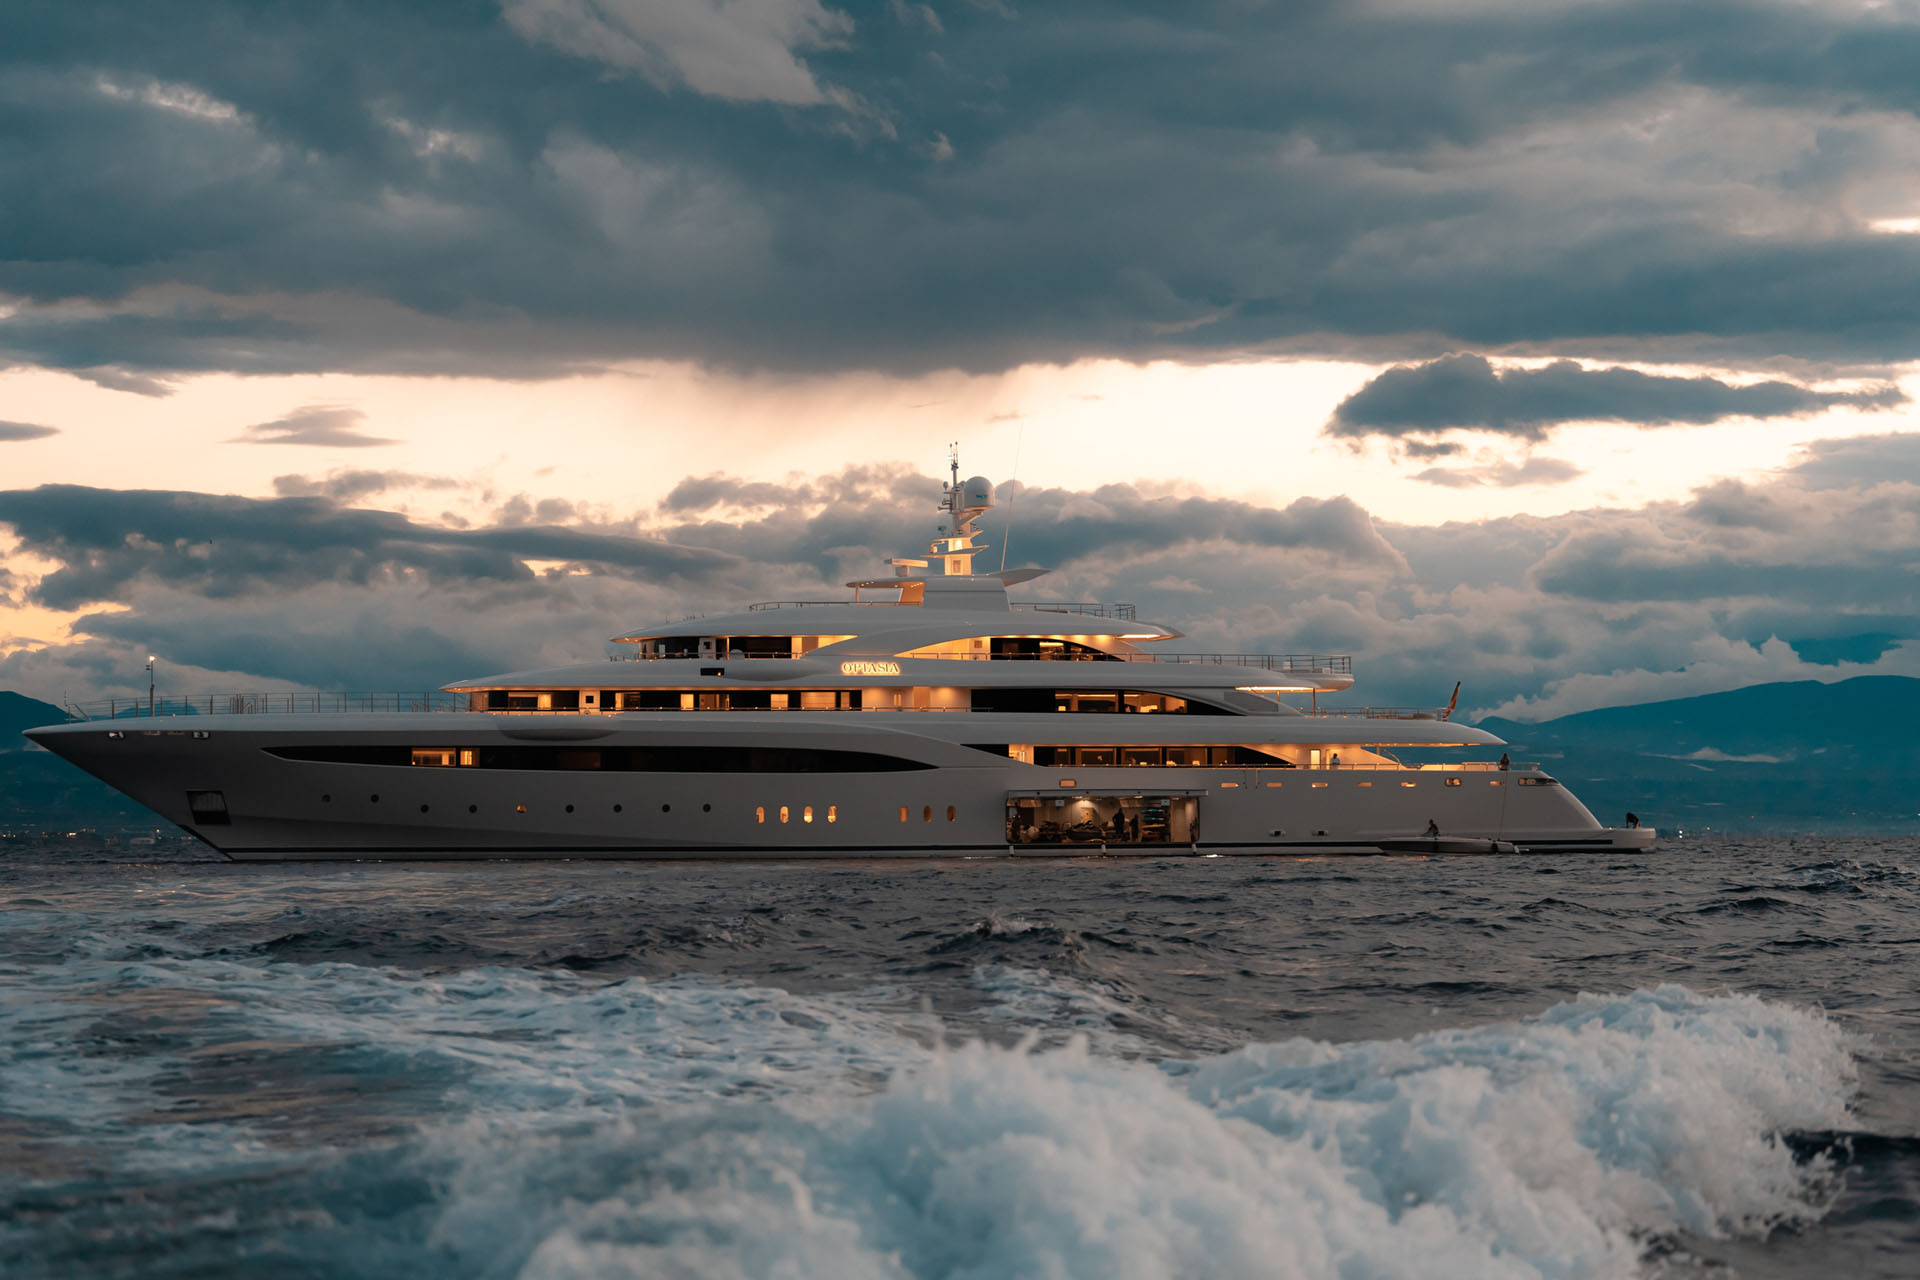 Profile Of Mega Yacht In The Evening